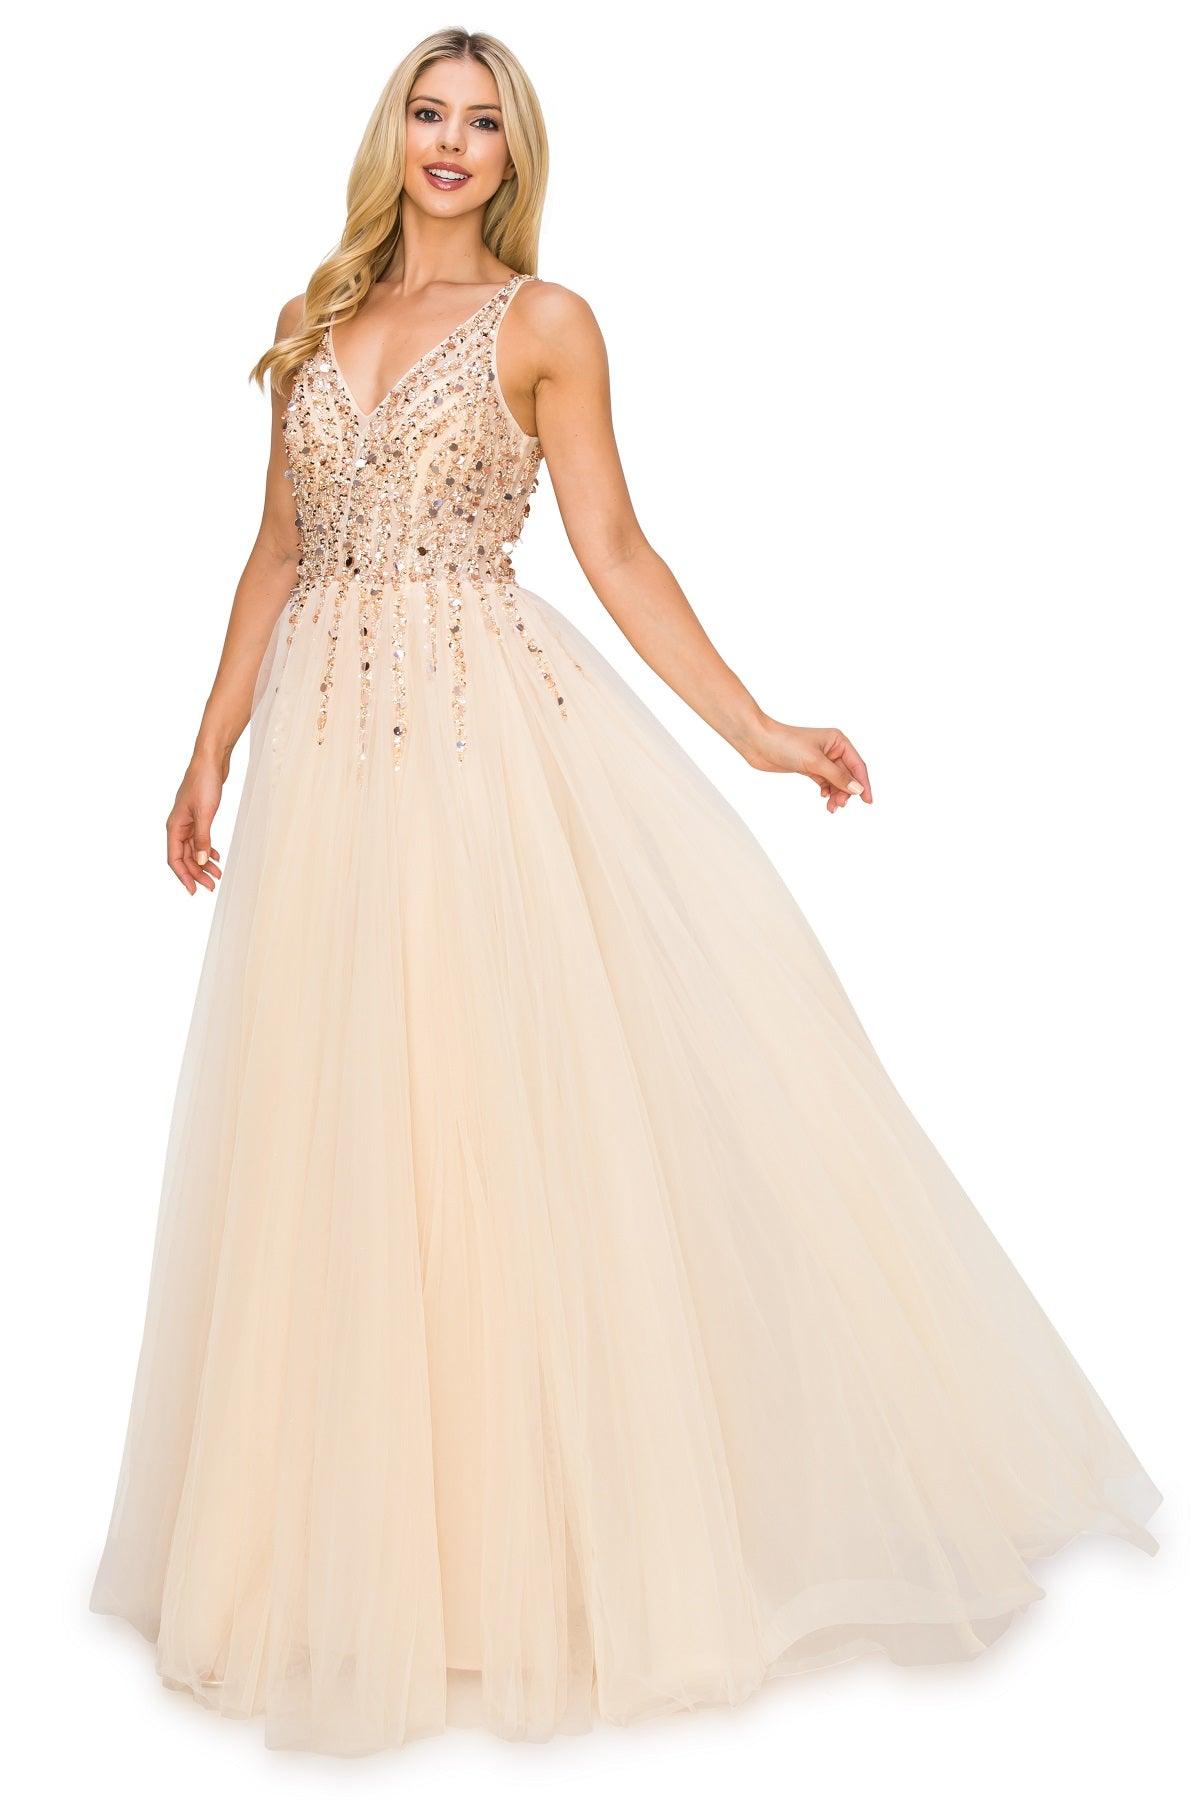 Cinderella Couture CC8034J Sleeveless Beaded Tulle Gown Champagne